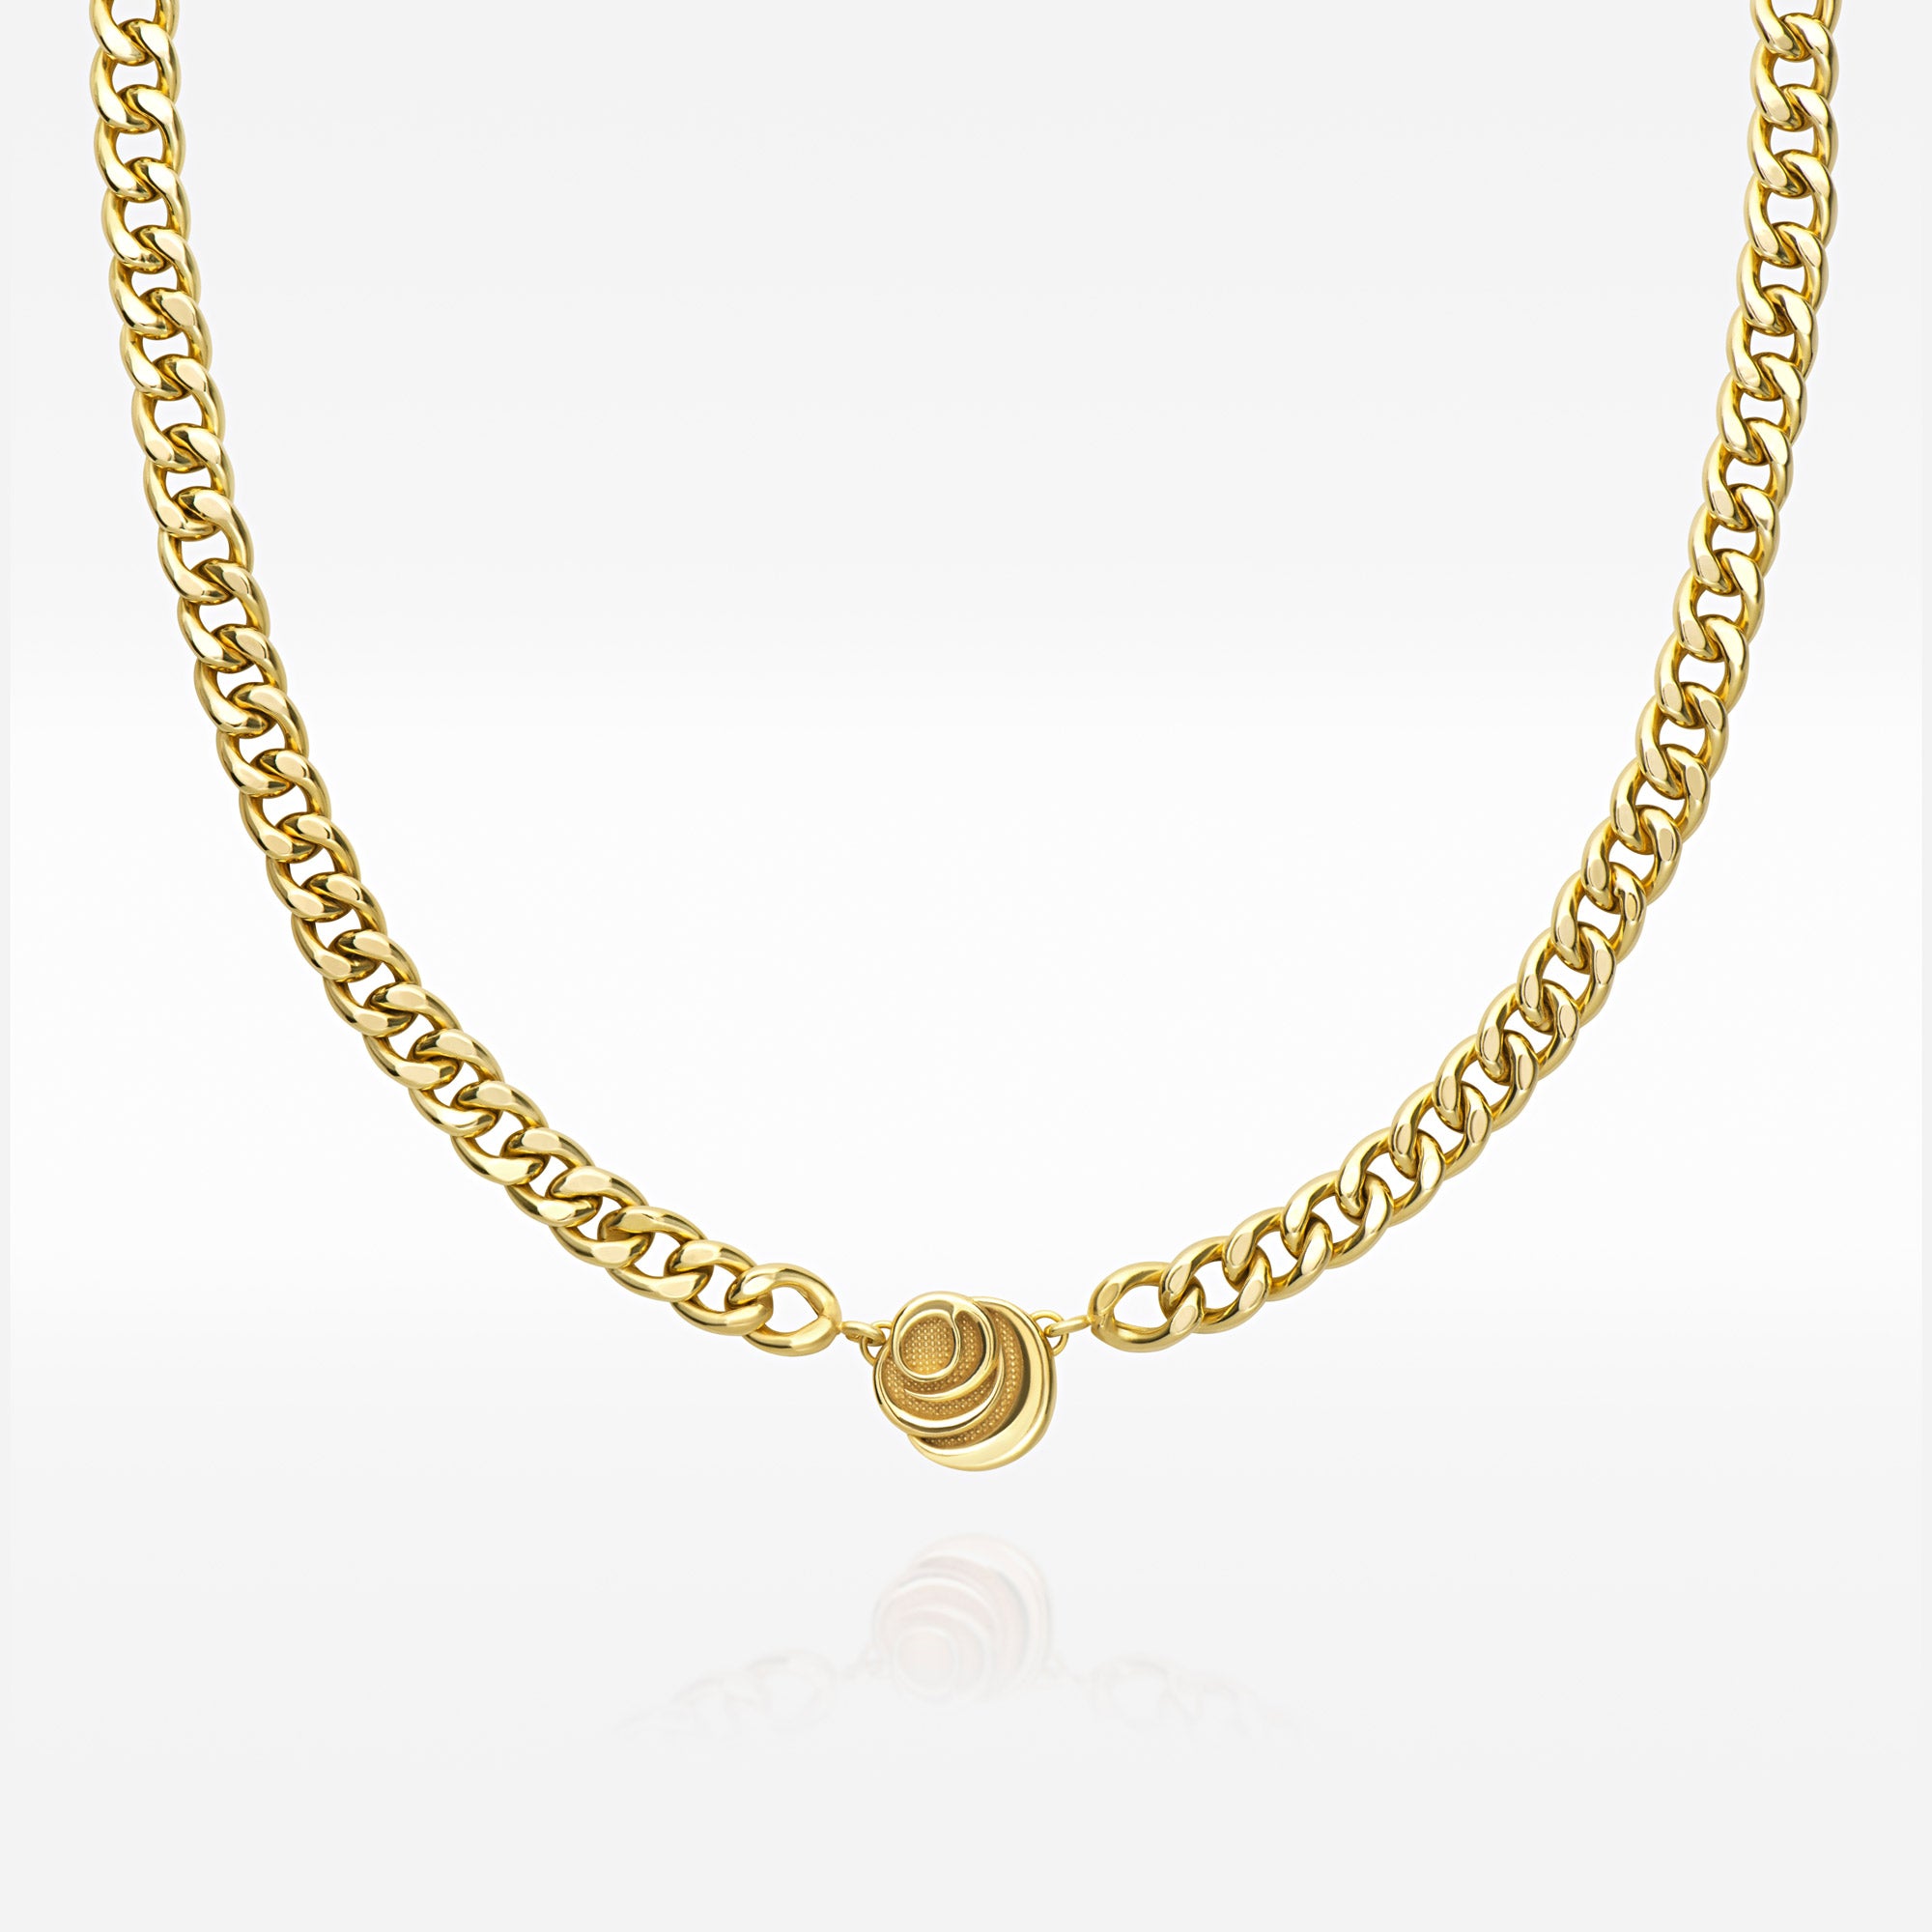 Roses Muse - 18k Gold Vermeil Jewelry